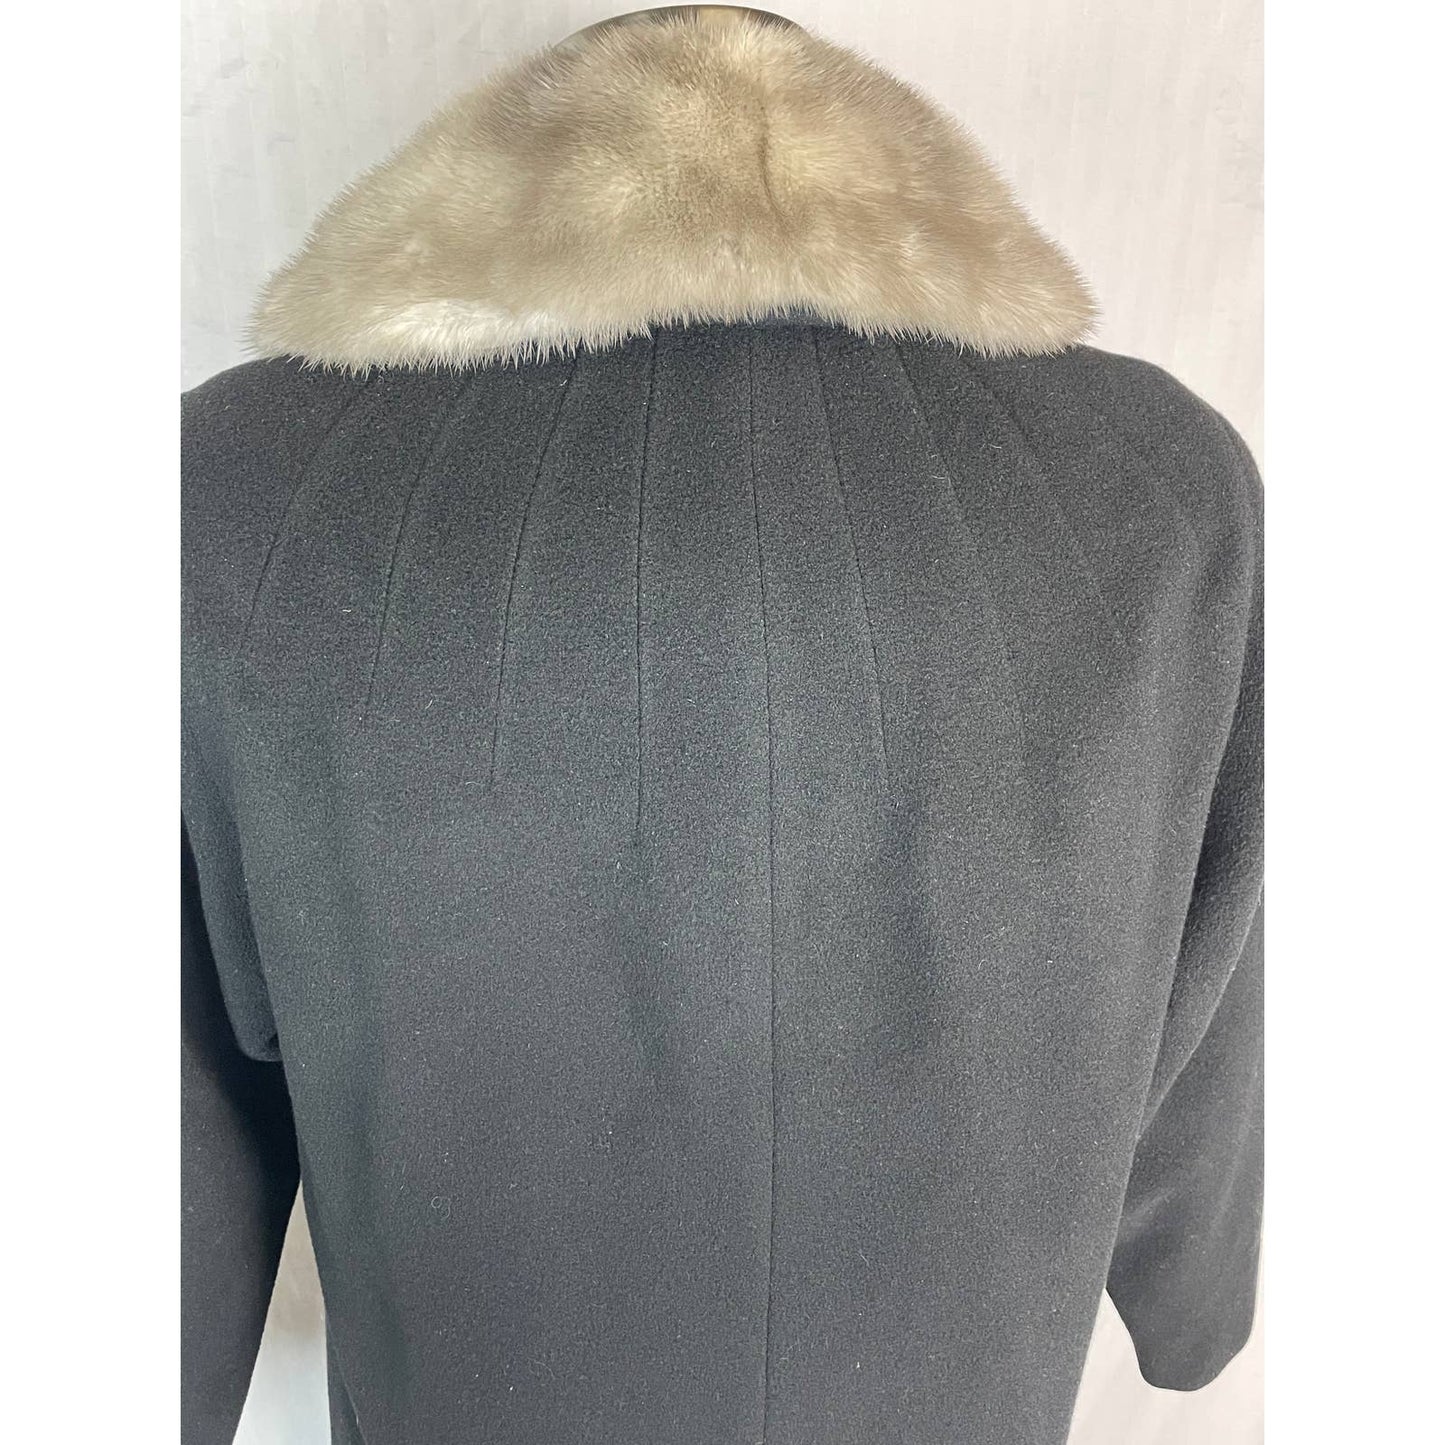 Vintage 1950s Black Cashmere Wool Coat Silver Gray Mink Fur Collar Rare Small/Med